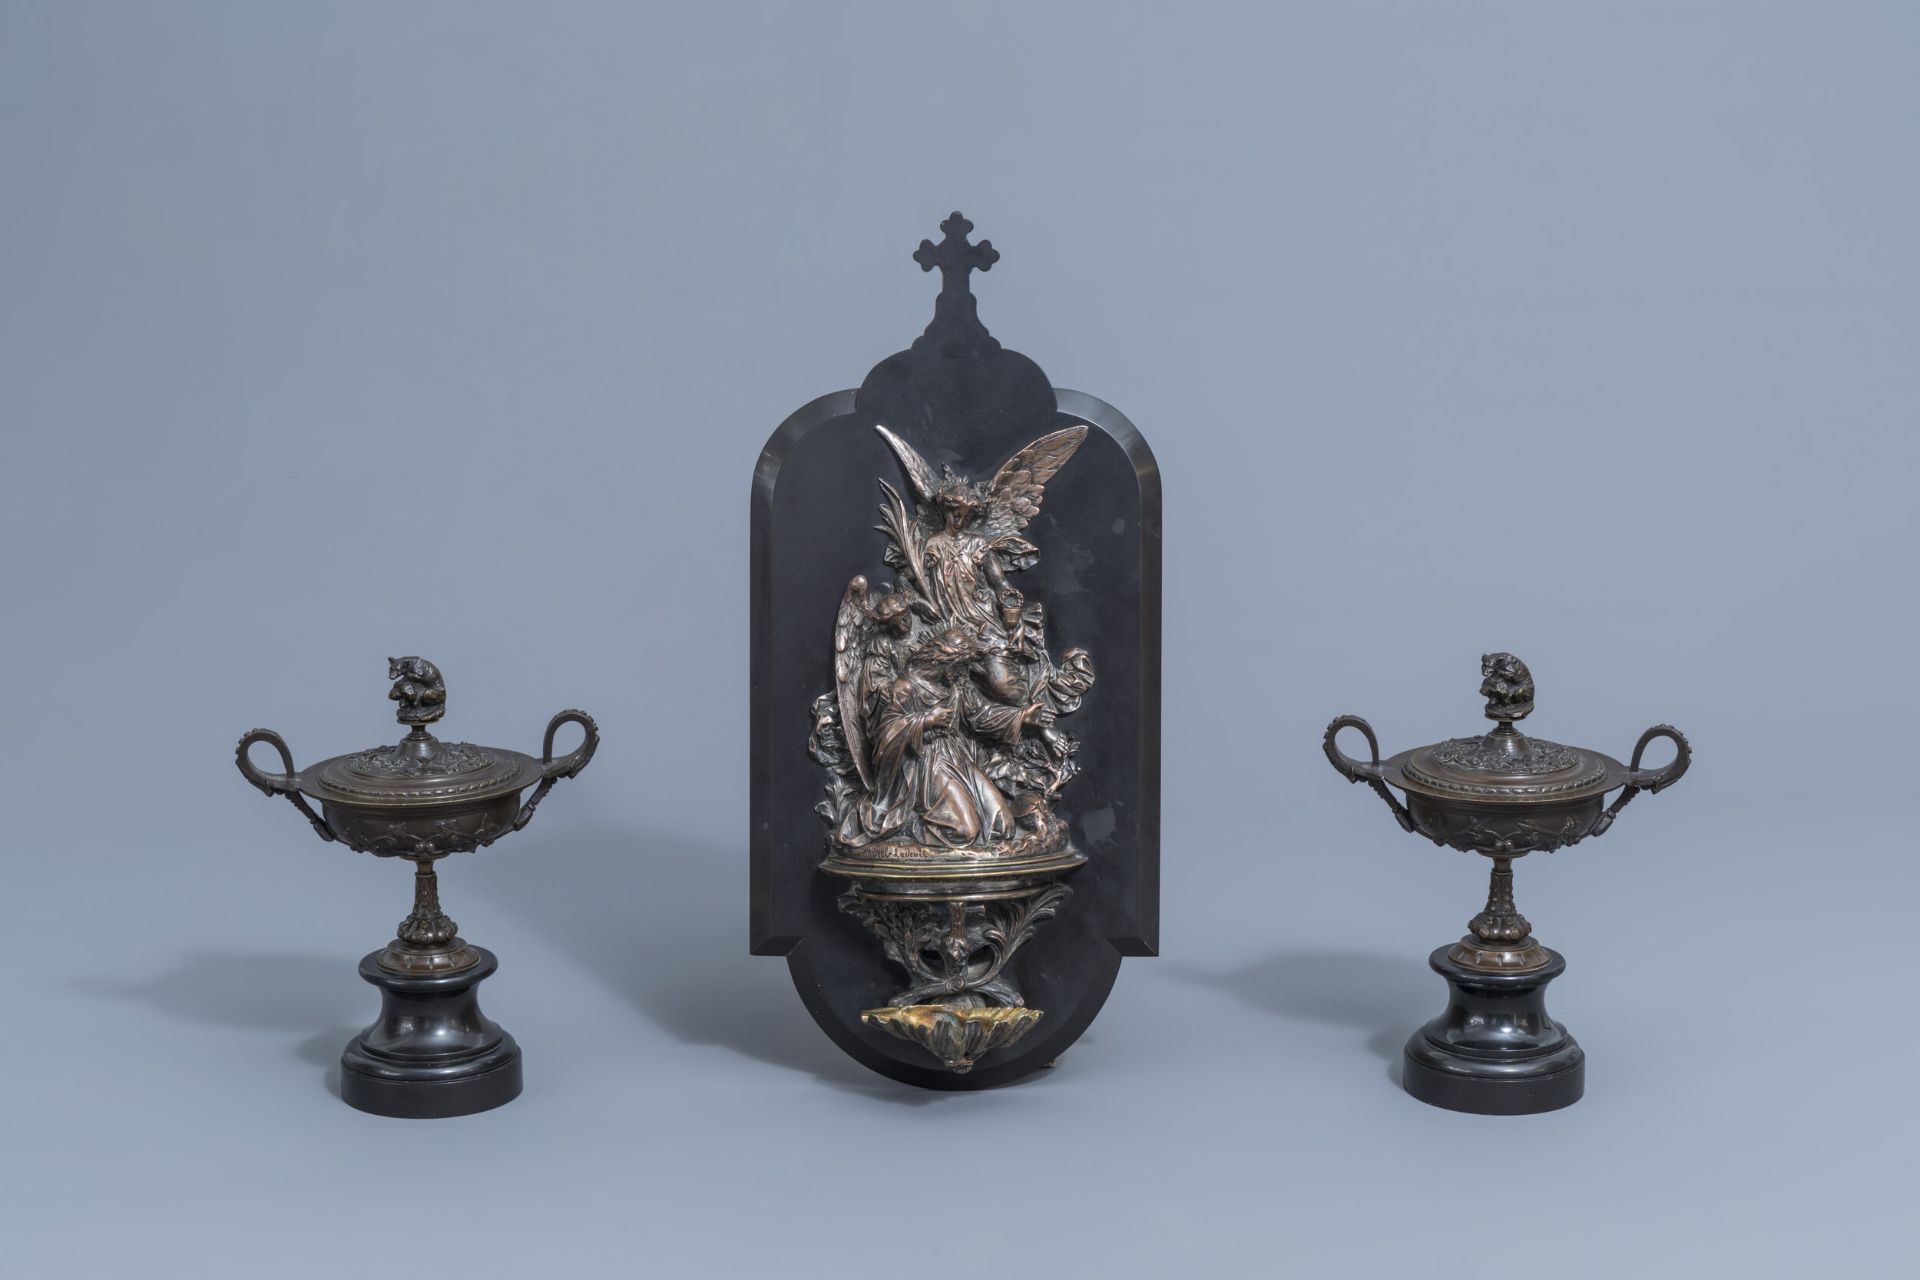 Leonard Morel-Ladeuil (1820-1888): holy water font with & Auguste Nicolas Cain (1821-1894): Two vase